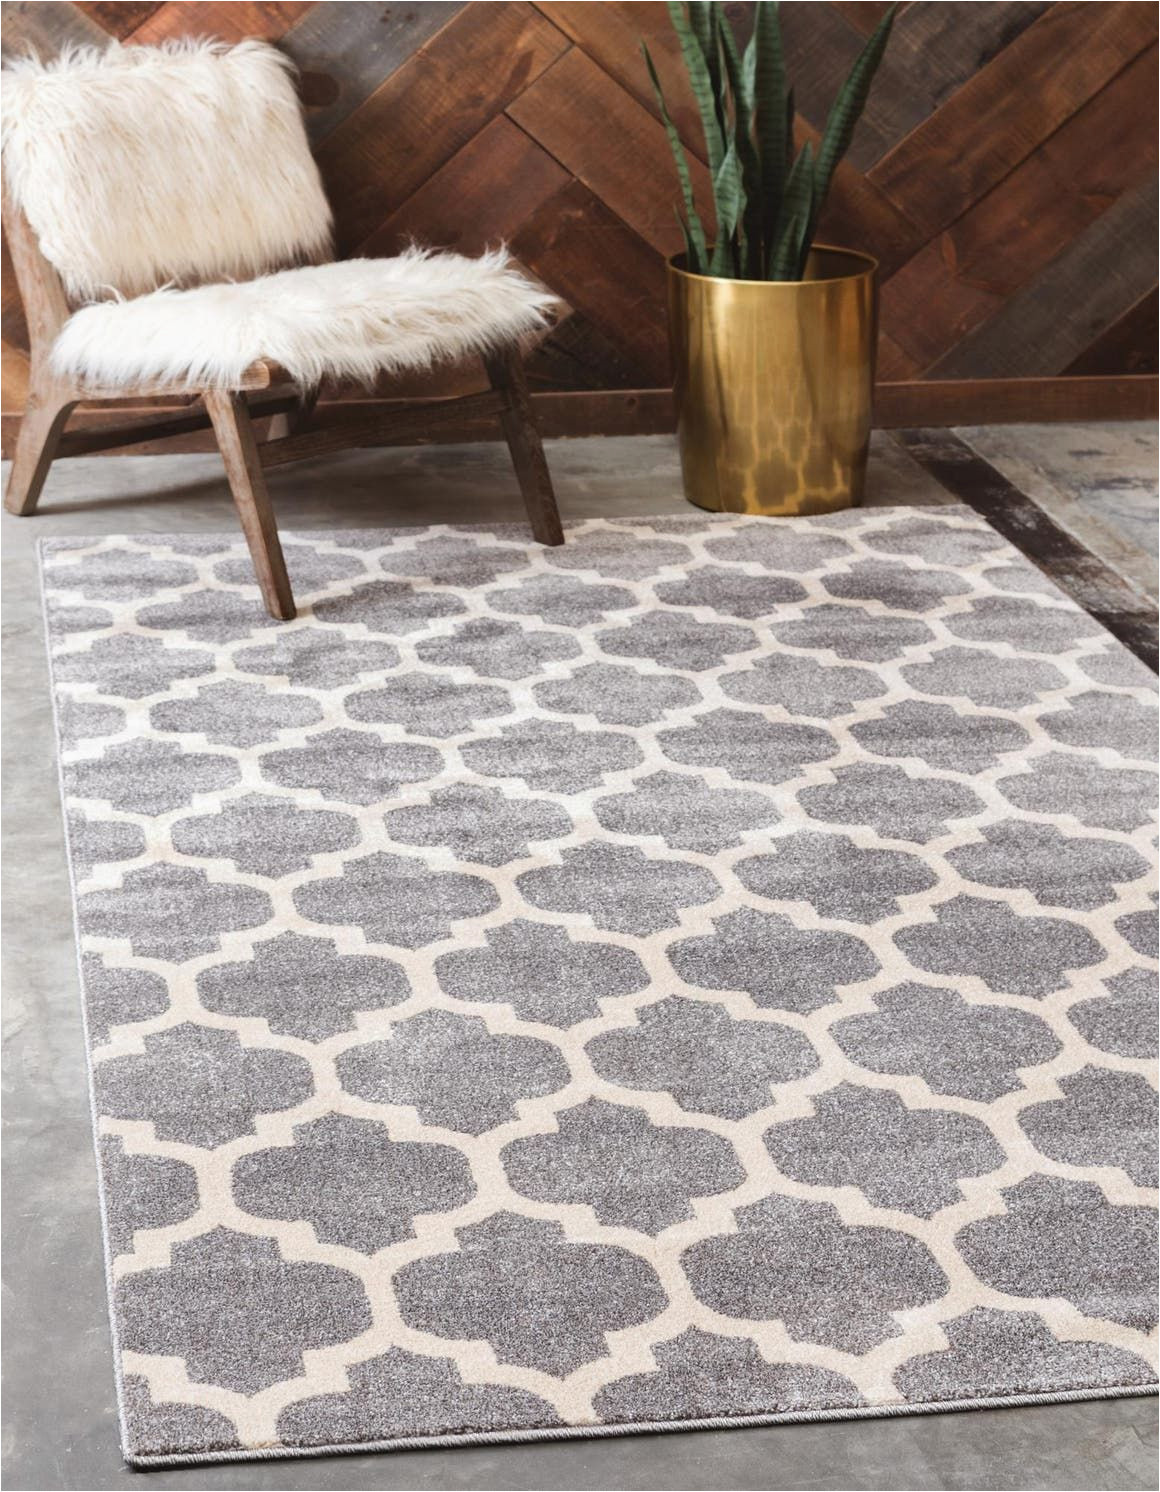 Places to Buy area Rugs 30 Best Places to Buy Rugs 2022 – where to Buy Cheap Rugs Online